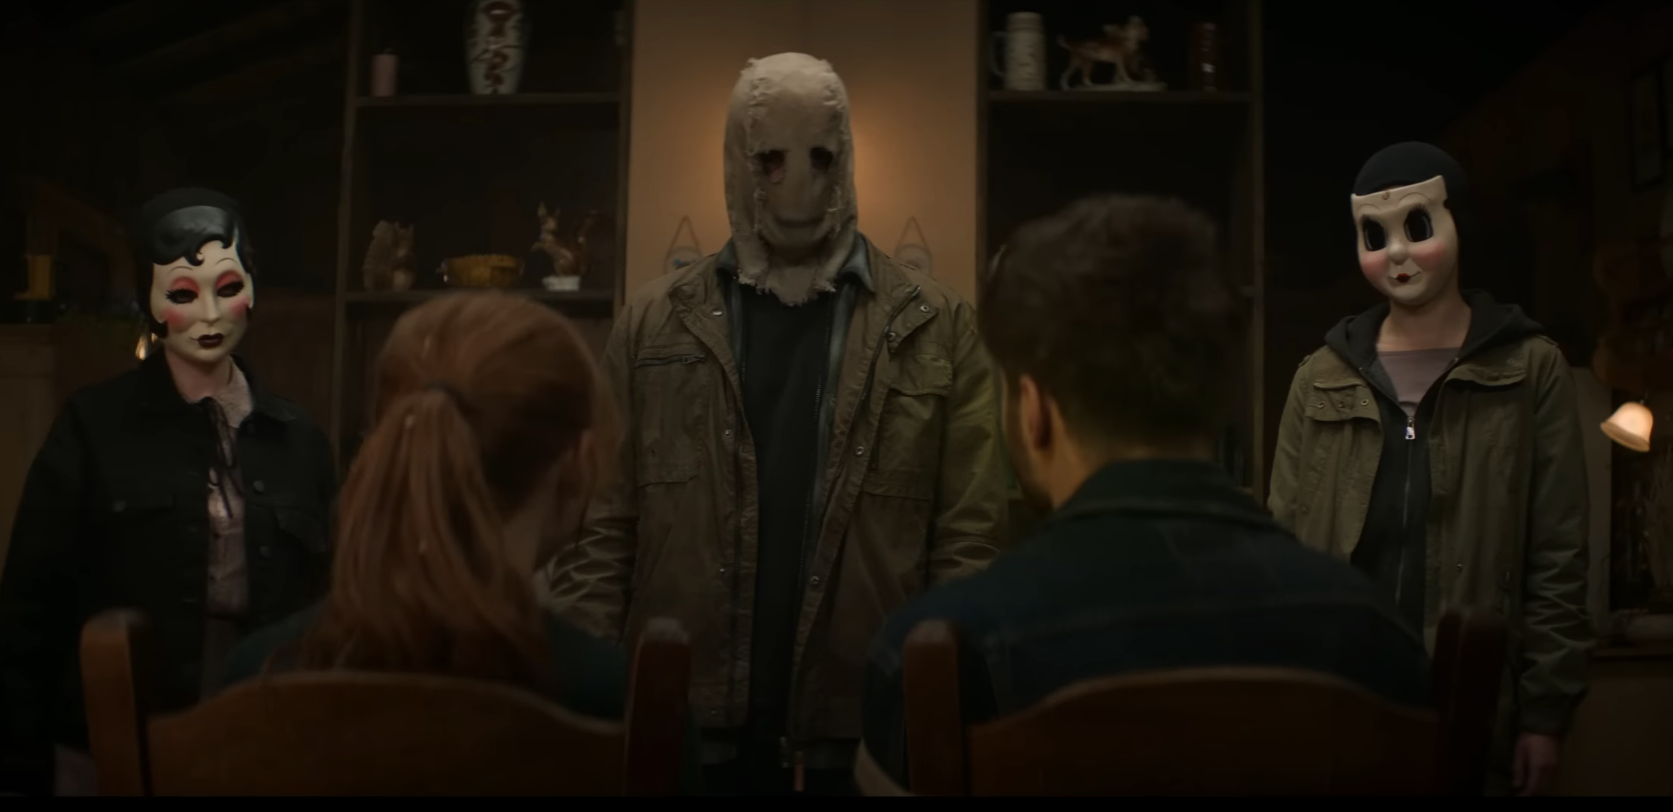 The Strangers Chapter 2